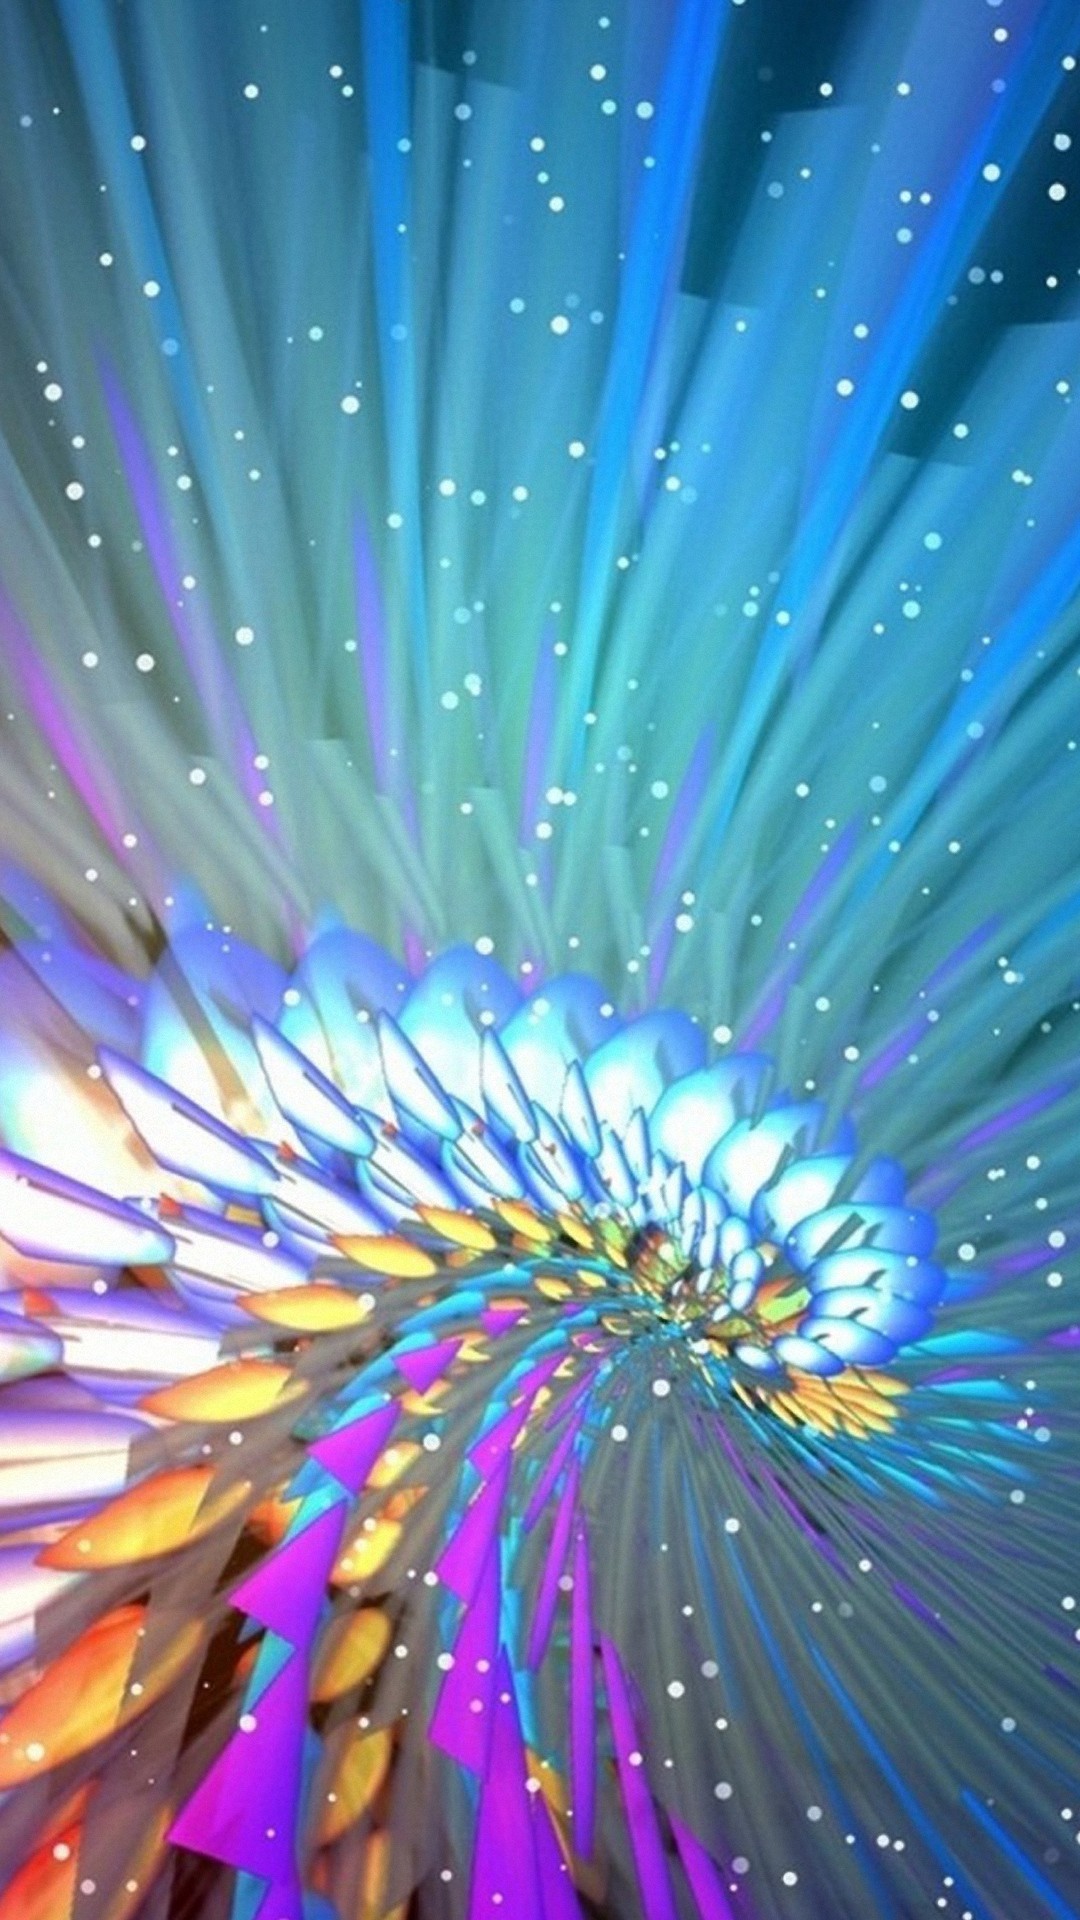 1080x1920 Nice Color Galaxy S4 S5 Wallpapers Hd  Resolution Images. home  decorators coupon code.